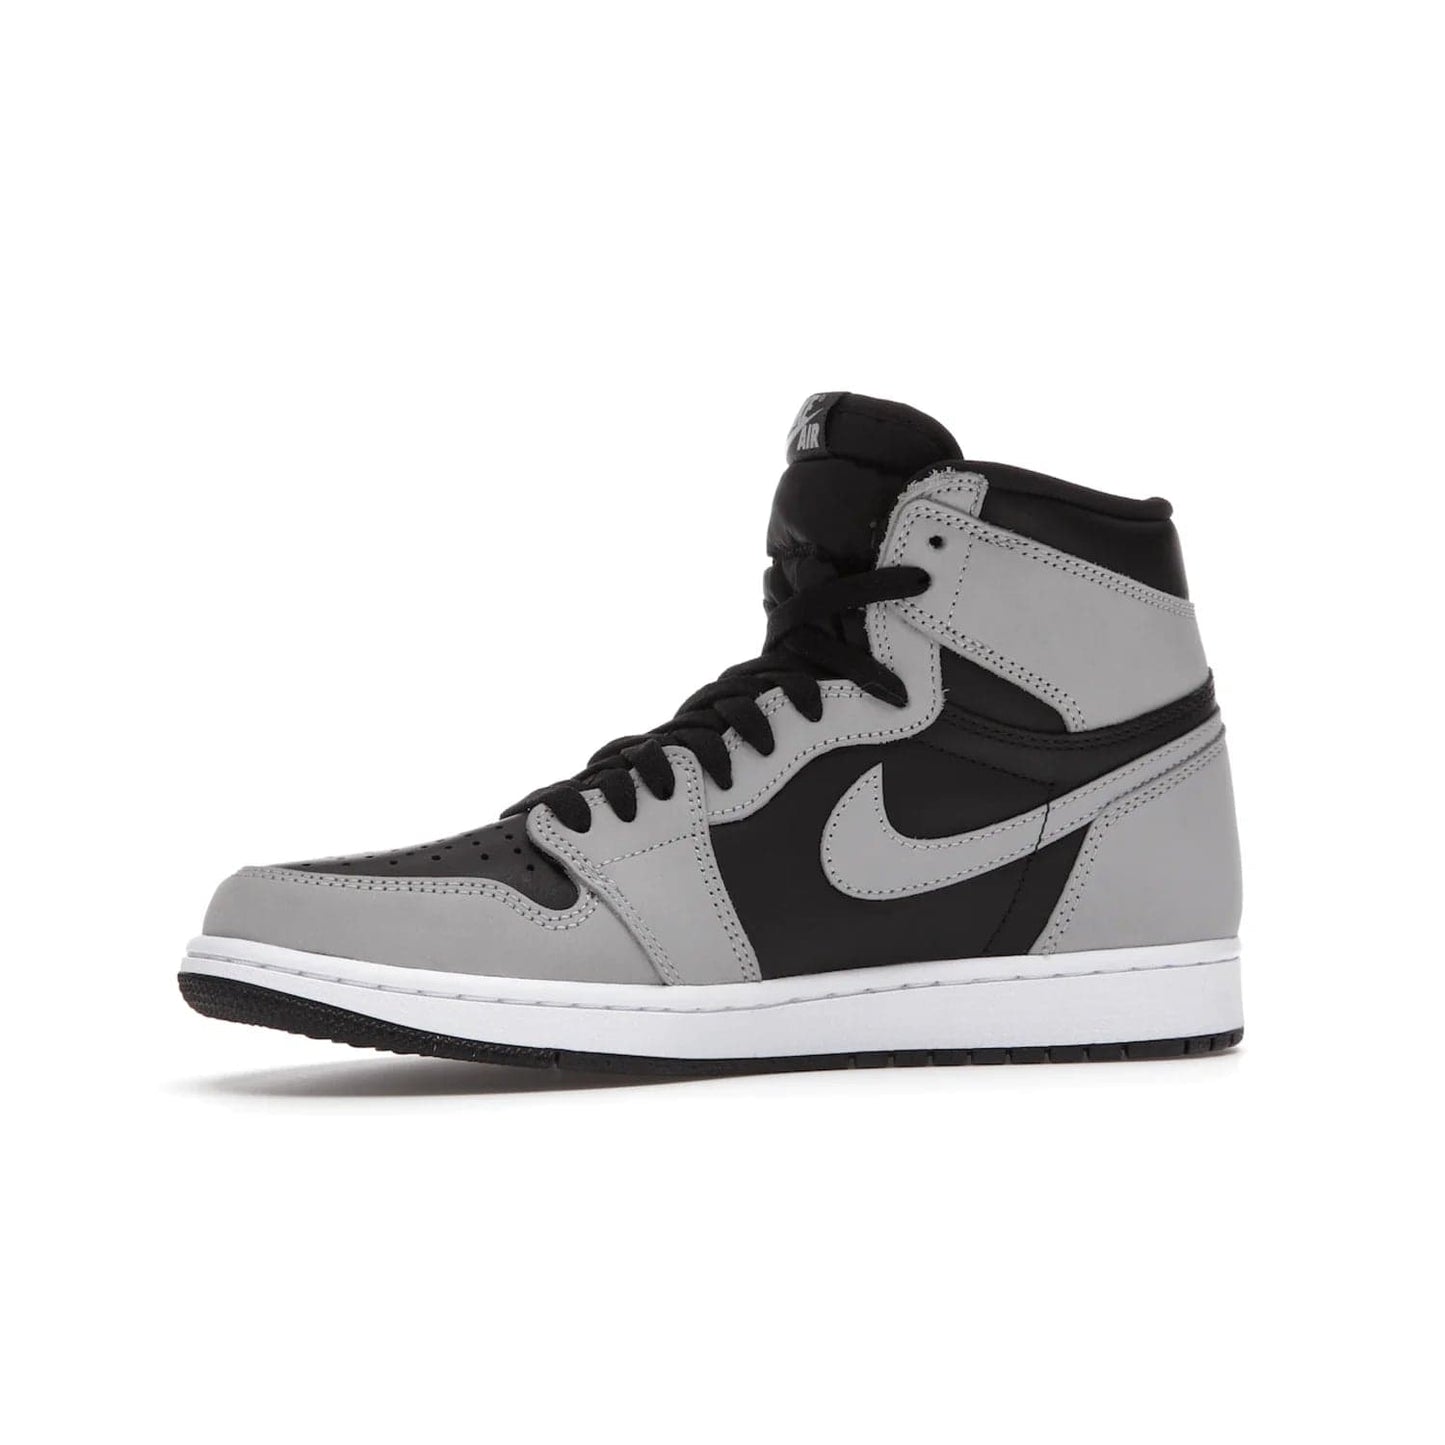 Jordan 1 Retro High Shadow 2.0 - Image 17 - Only at www.BallersClubKickz.com - #
Classic Air Jordan 1 Retro High Shadow 2.0 with black leather base and Light Smoke Grey overlays. Released in May 2021.